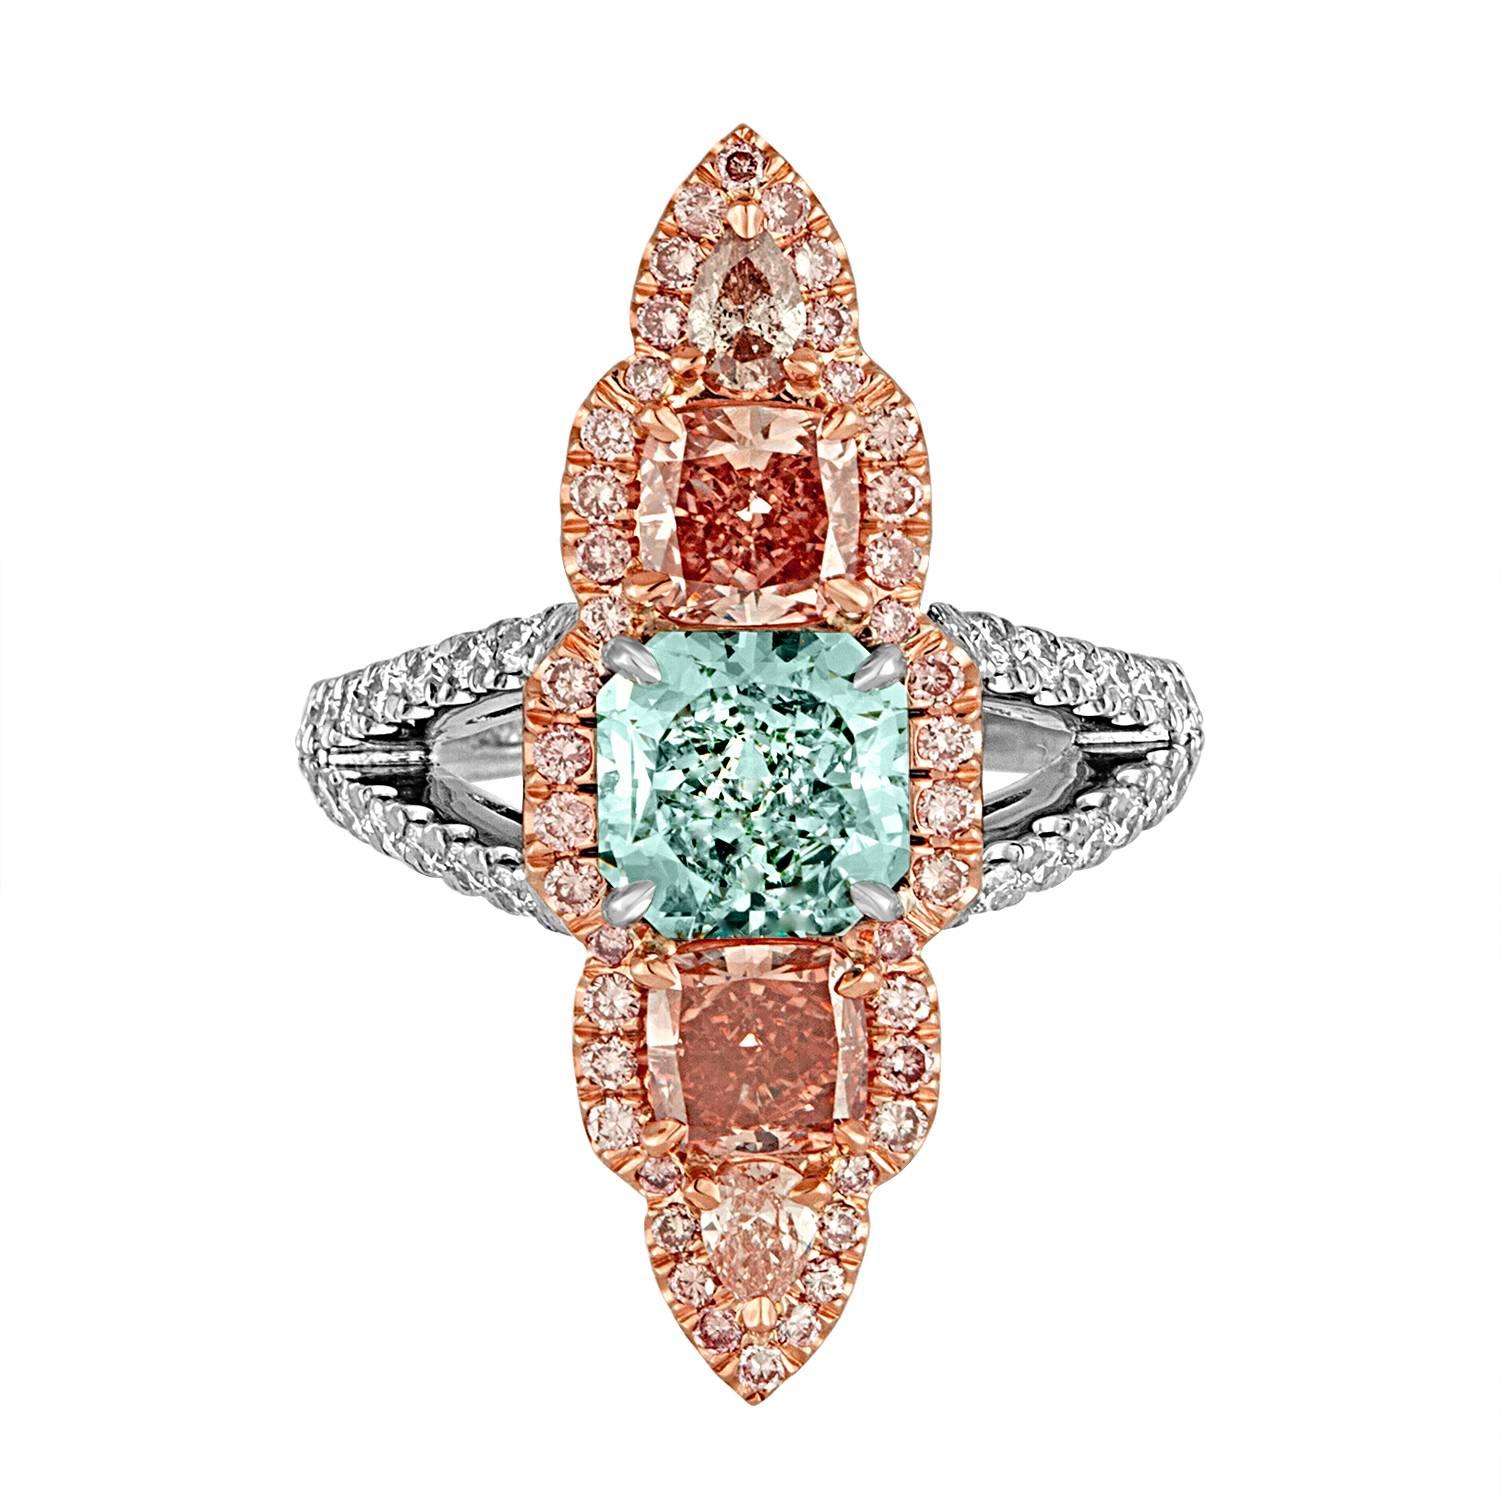 1.57 Carat GIA Certified Blue Green Cushion Cut and Pink and White Diamonds Ring (Kissenschliff) im Angebot